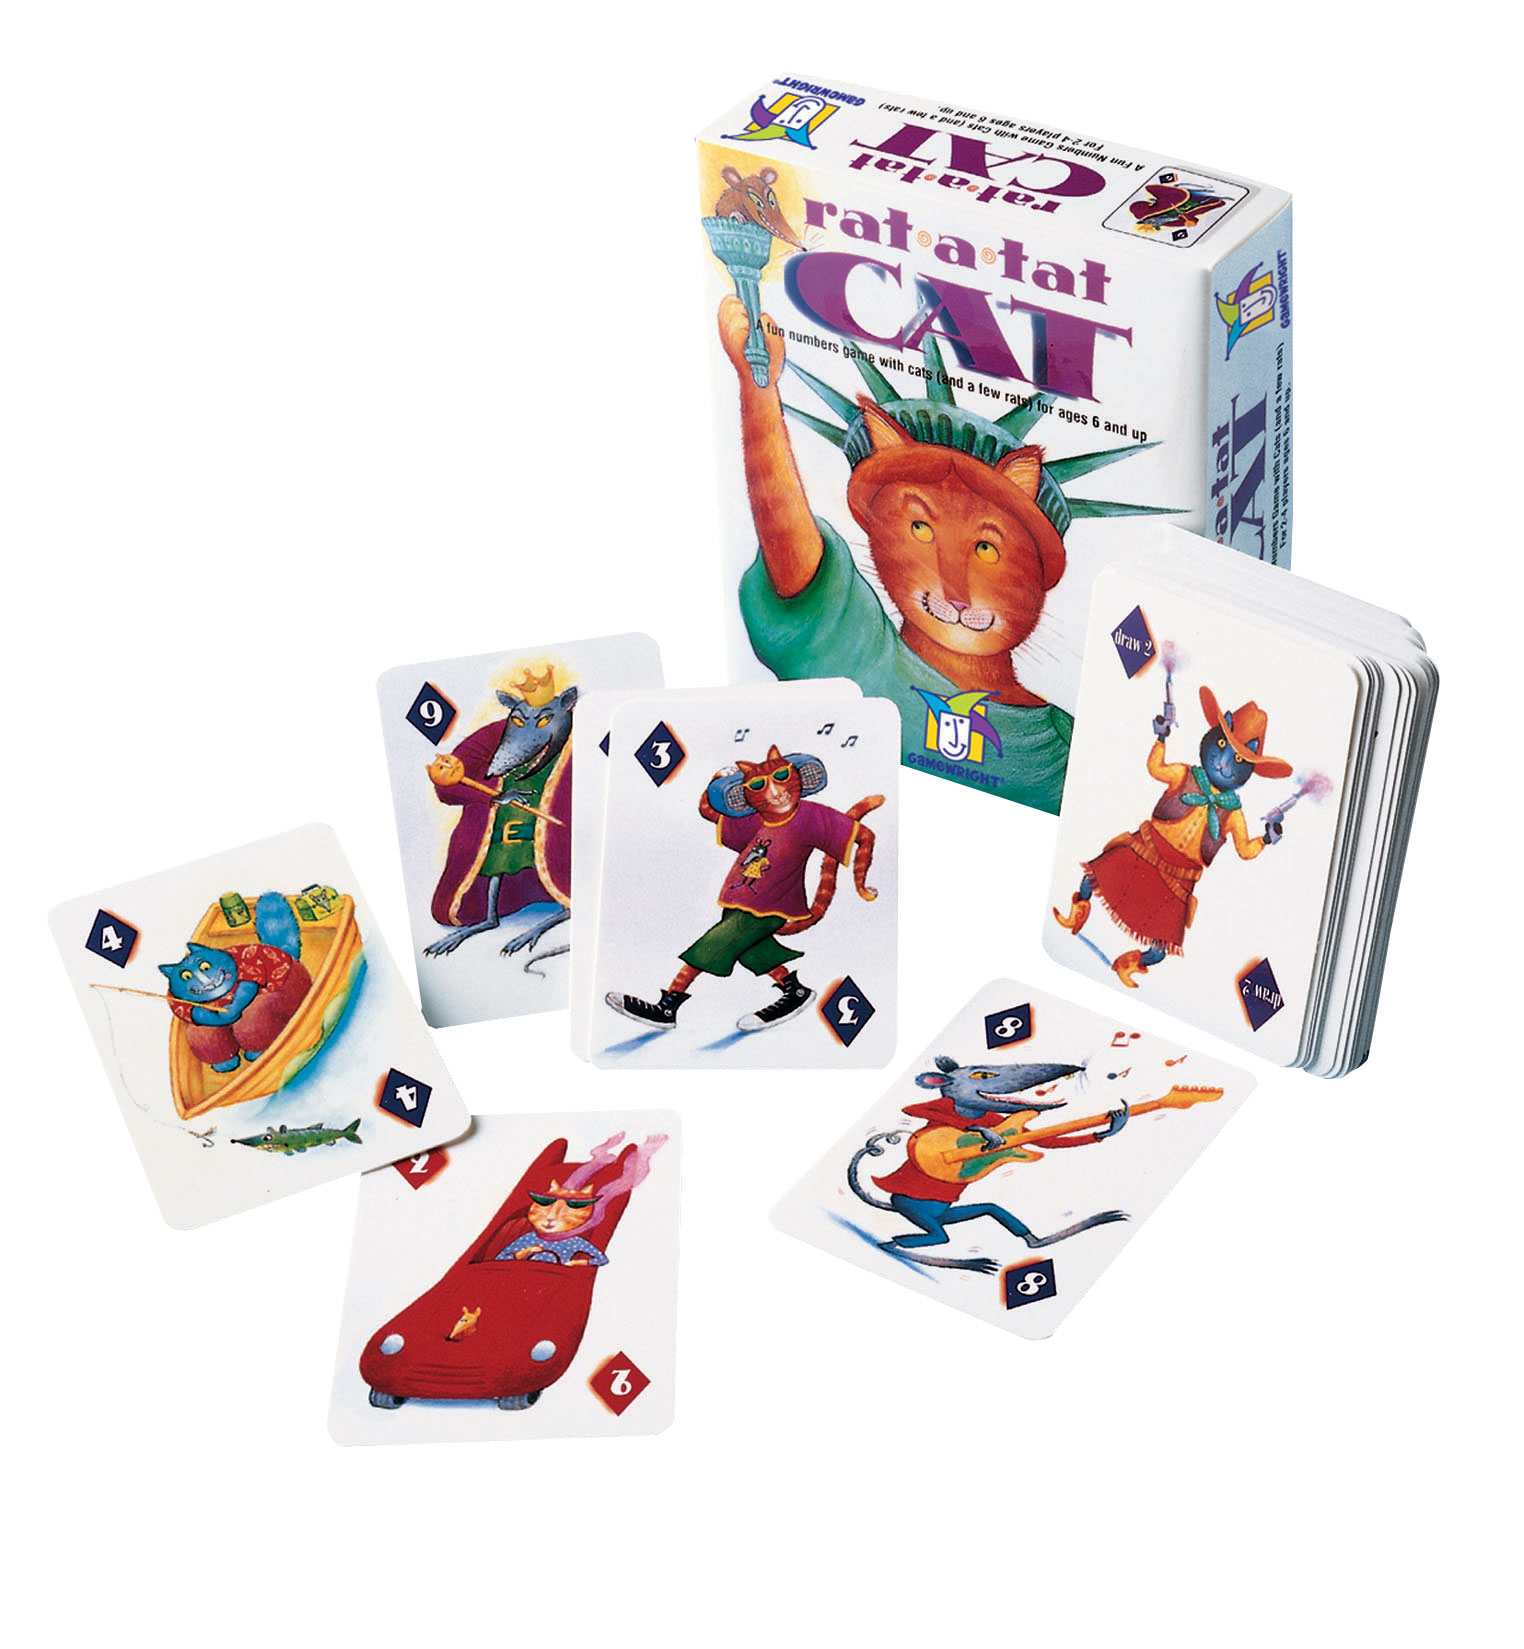 Rat-a-Tat Cat | A Fun Numbers Card Game with Cats (and a few rats)